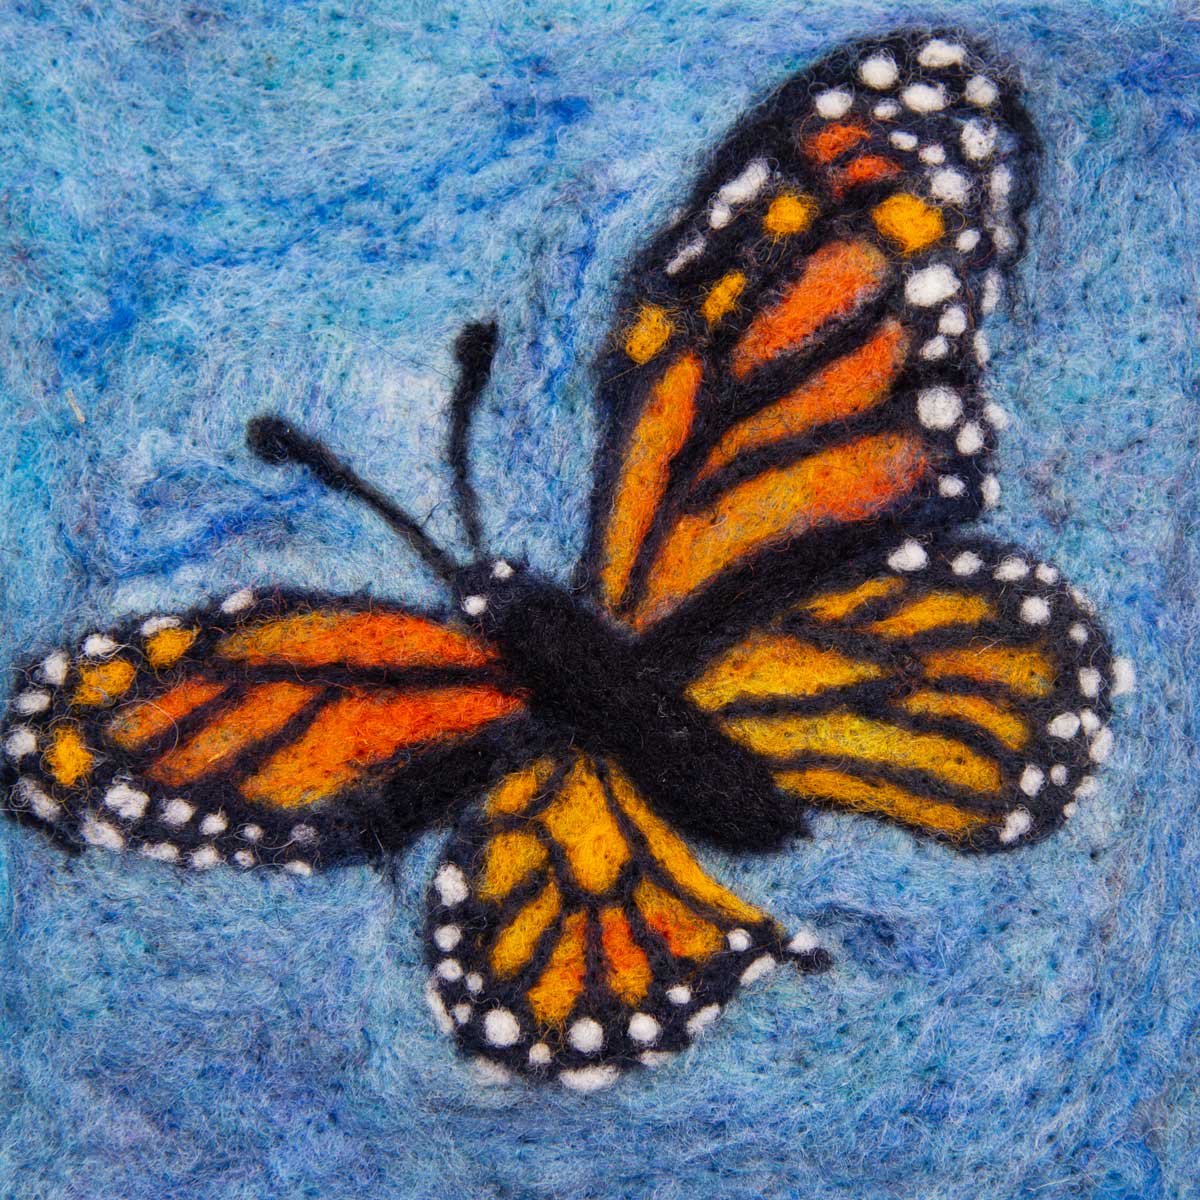 Butterfly - Needle Felted Illustration for Hillary Dow's ABC picture book